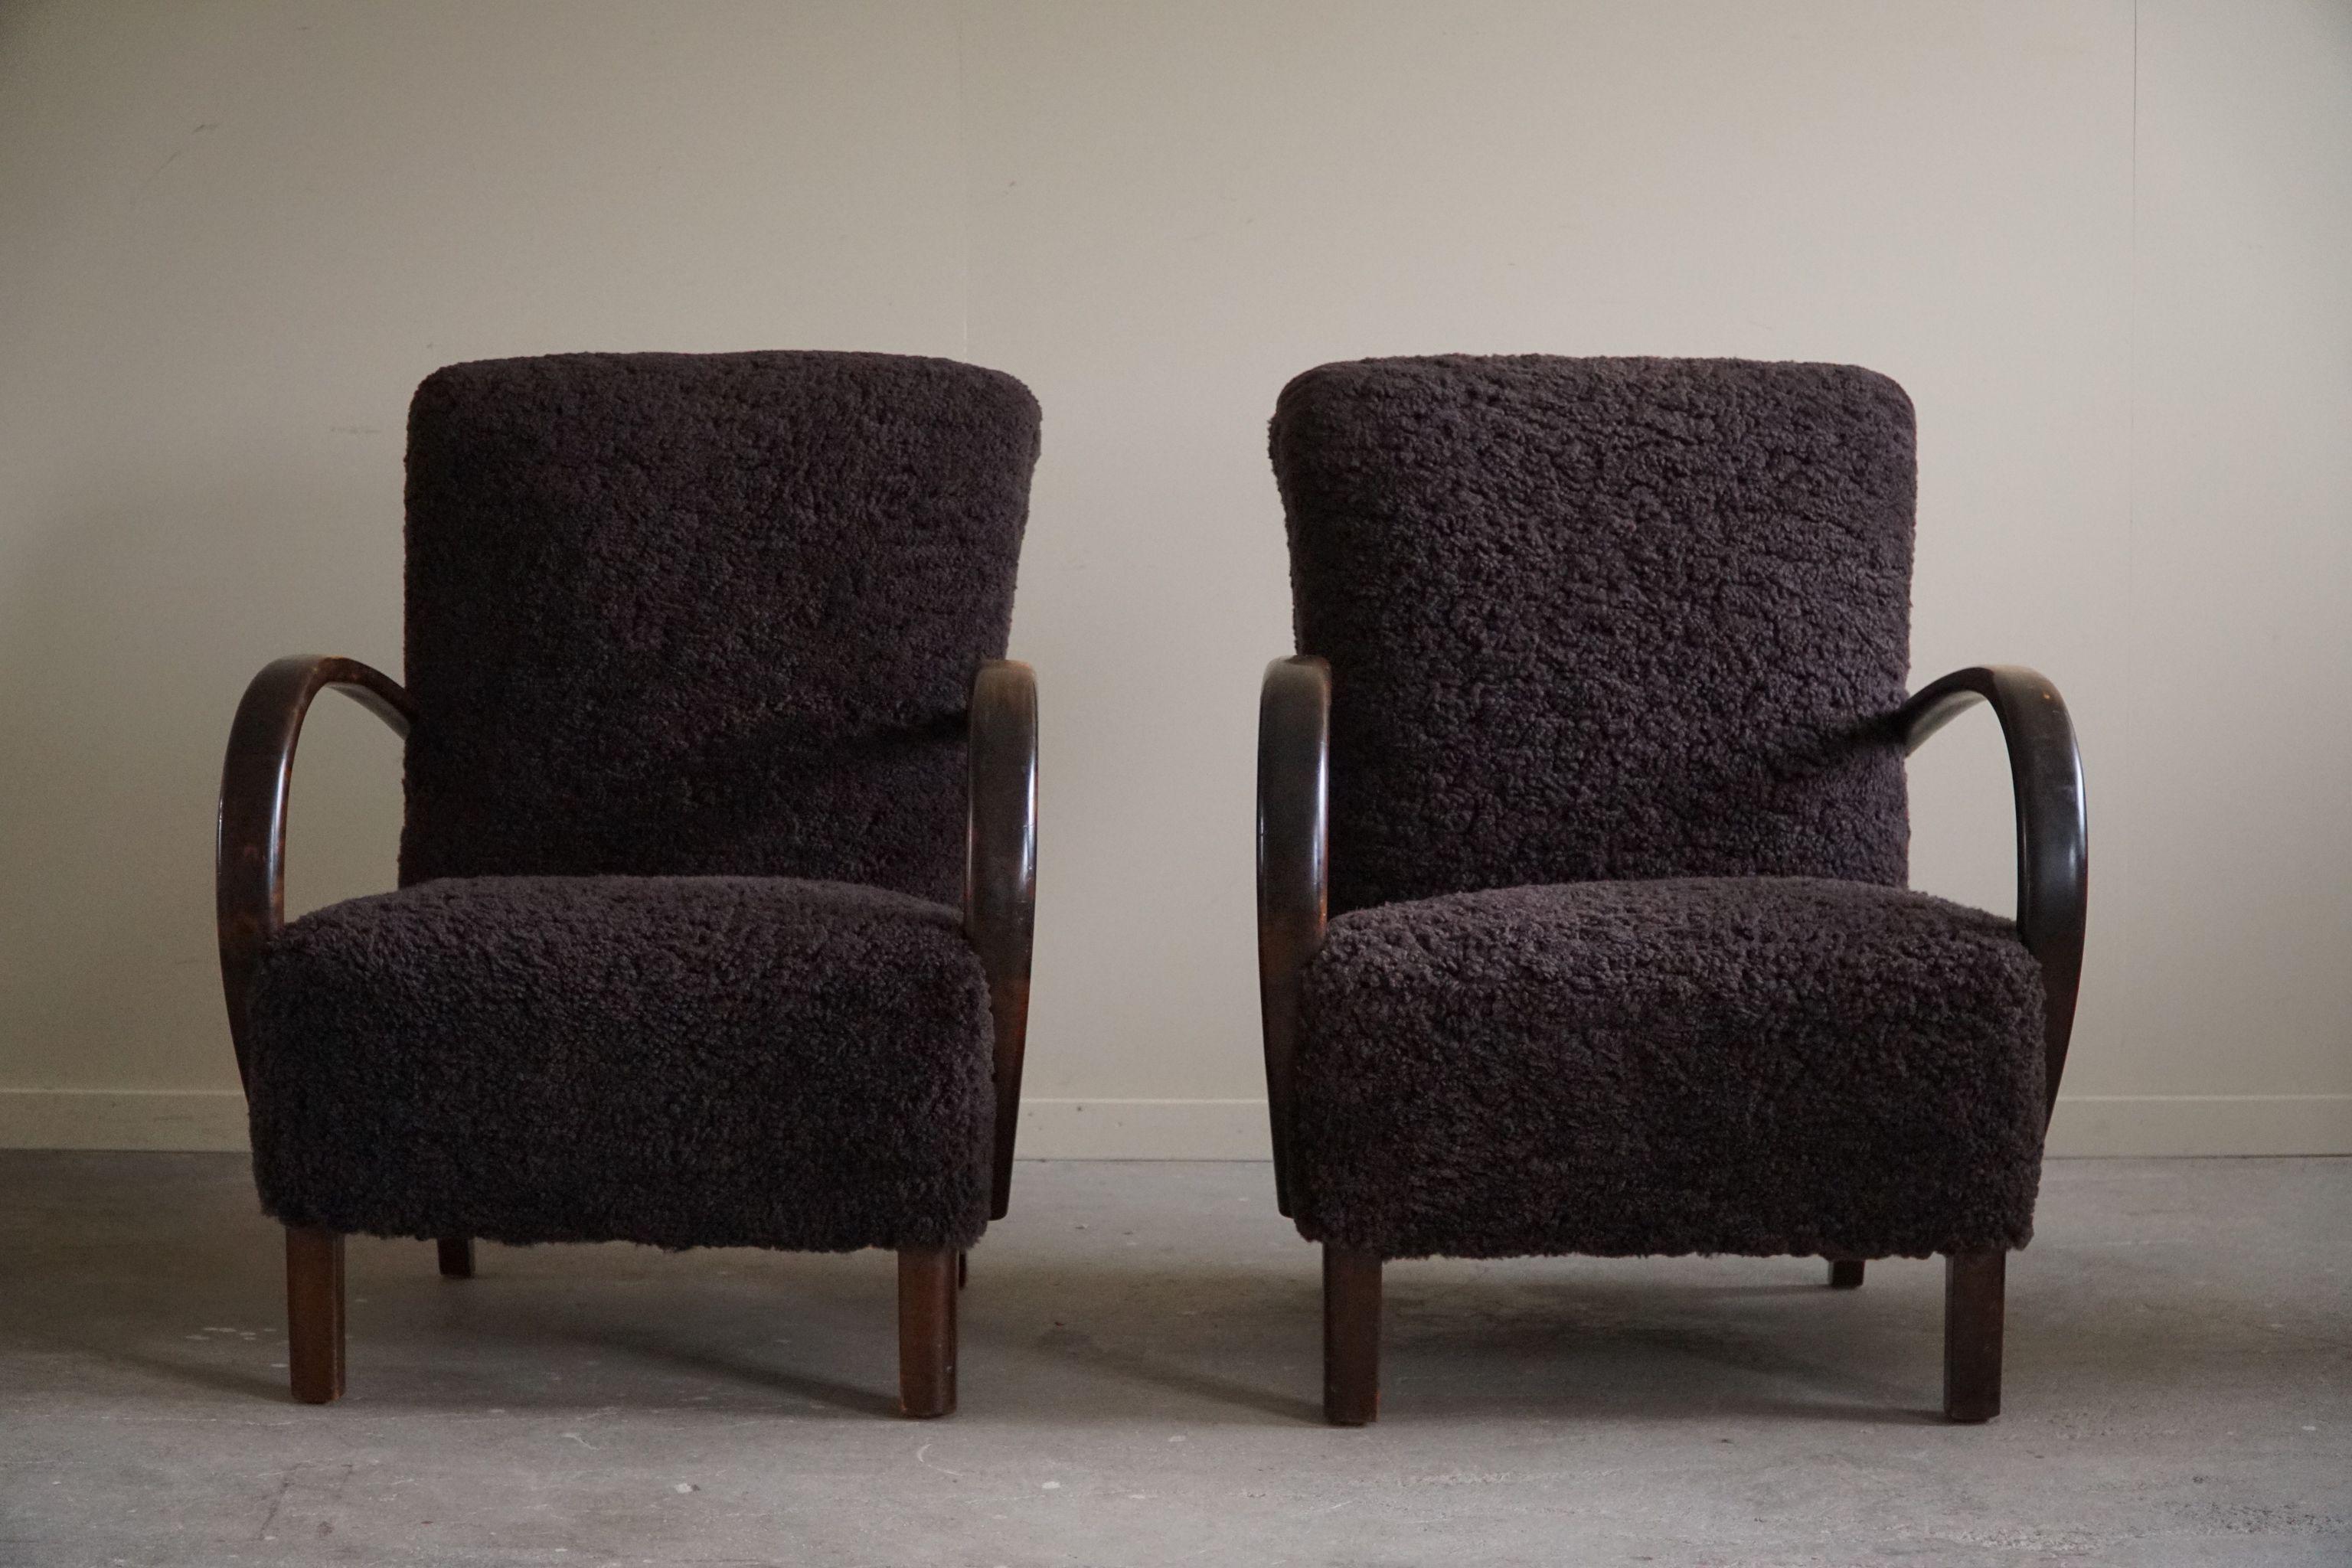 A Pair of Danish Mid Century Modern Lounge Chairs in Beech & Lambswool, 1940s For Sale 9